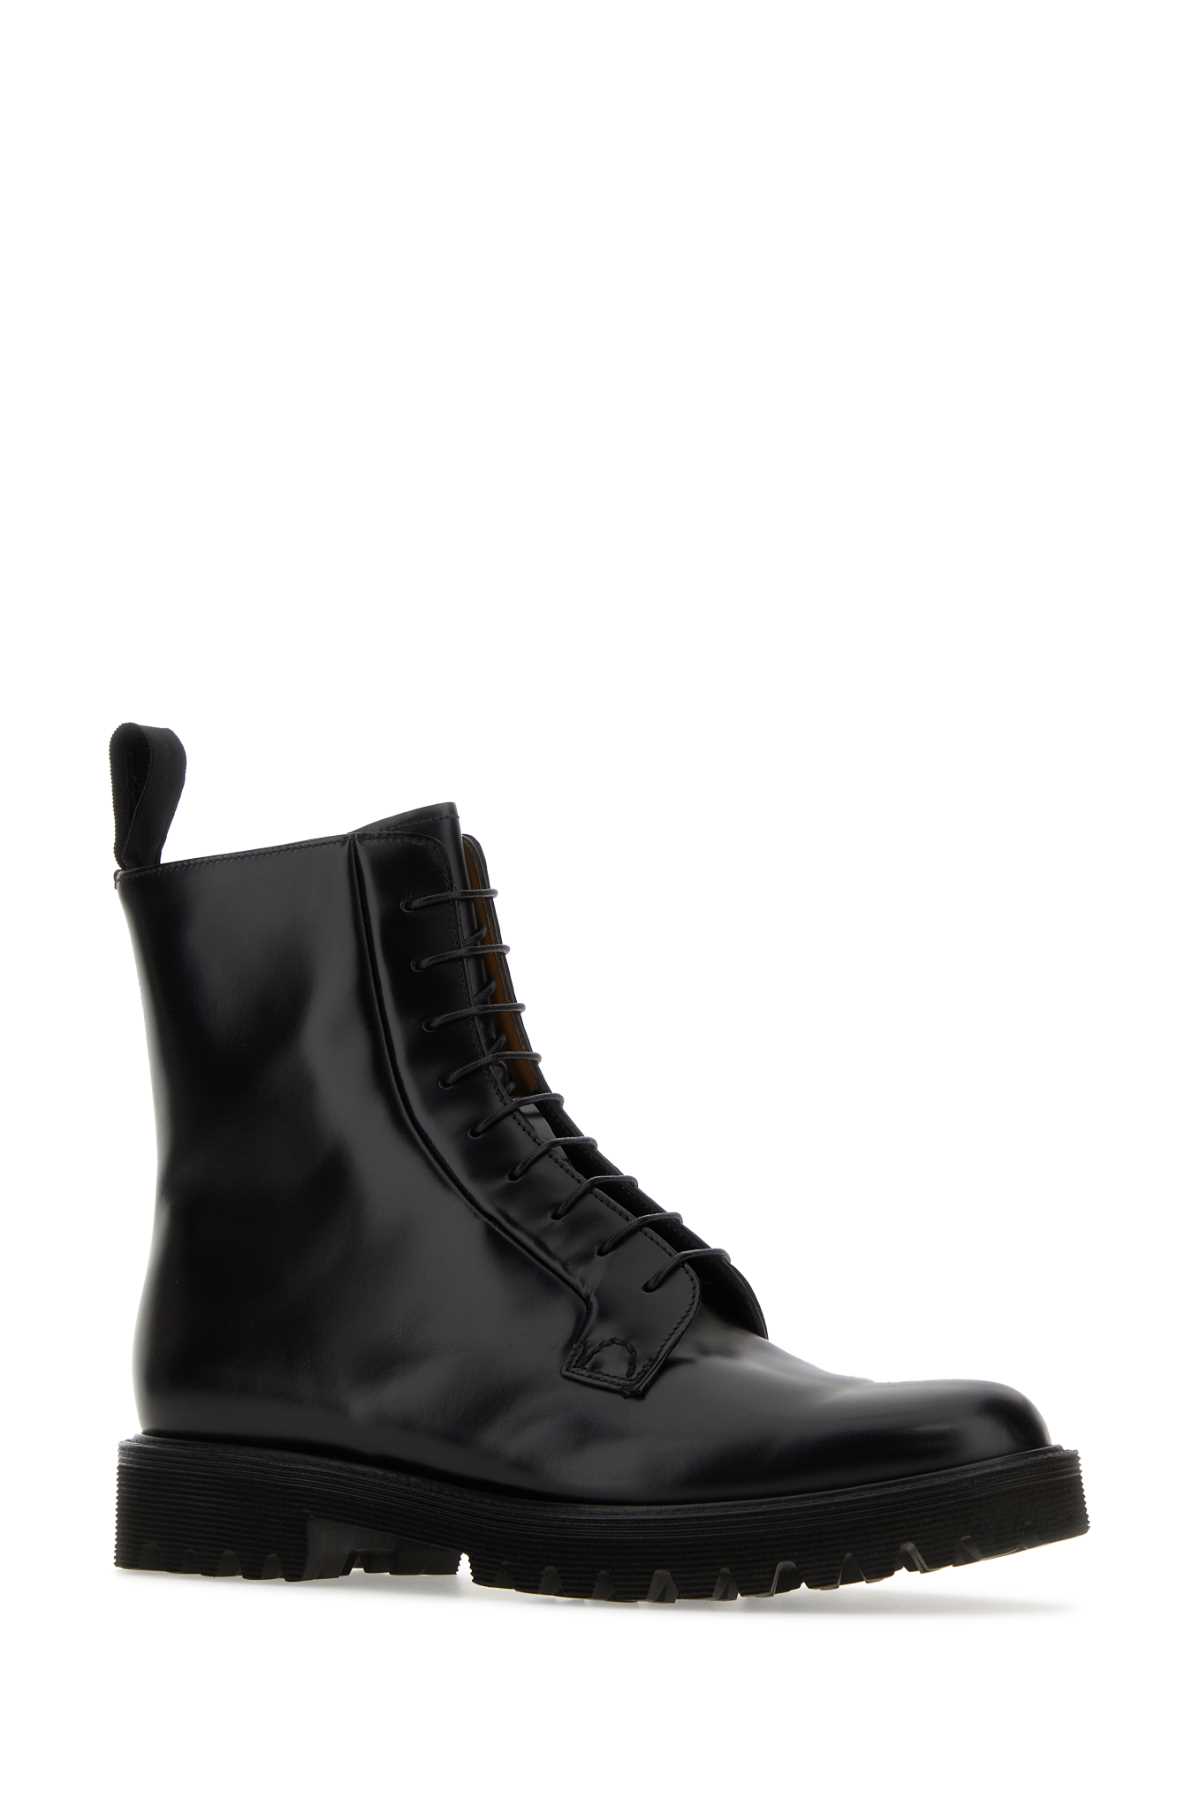 Shop Church's Black Leather Alexandra T Ankle Boots